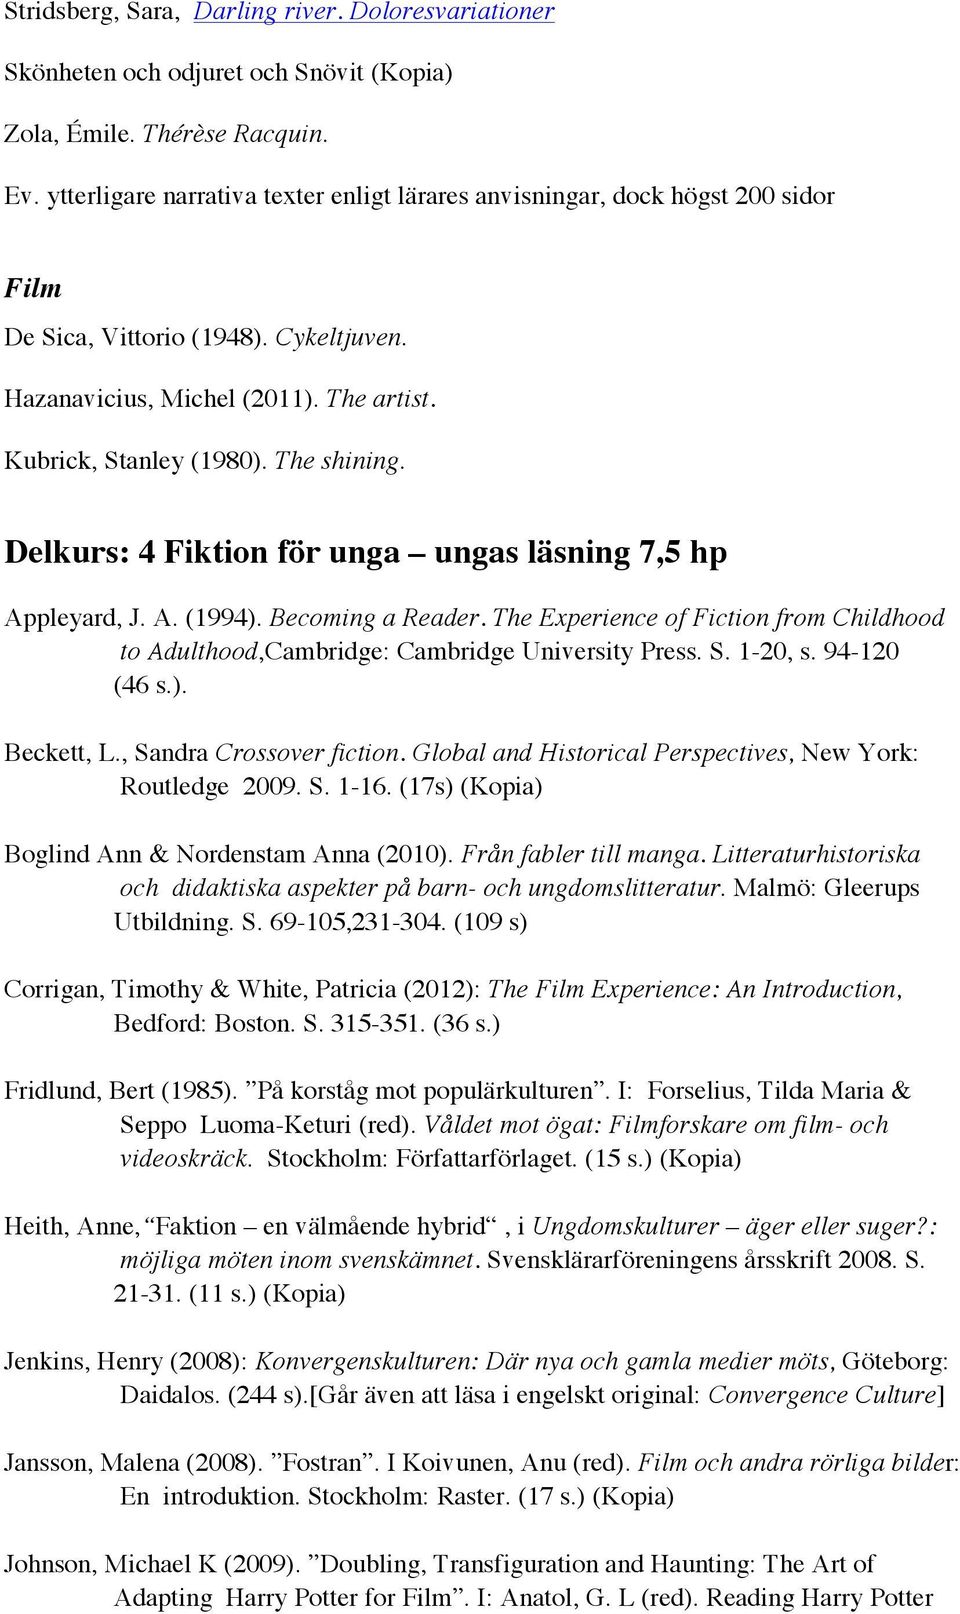 Delkurs: 4 Fiktion för unga ungas läsning 7,5 hp Appleyard, J. A. (1994). Becoming a Reader. The Experience of Fiction from Childhood to Adulthood,Cambridge: Cambridge University Press. S. 1-20, s.